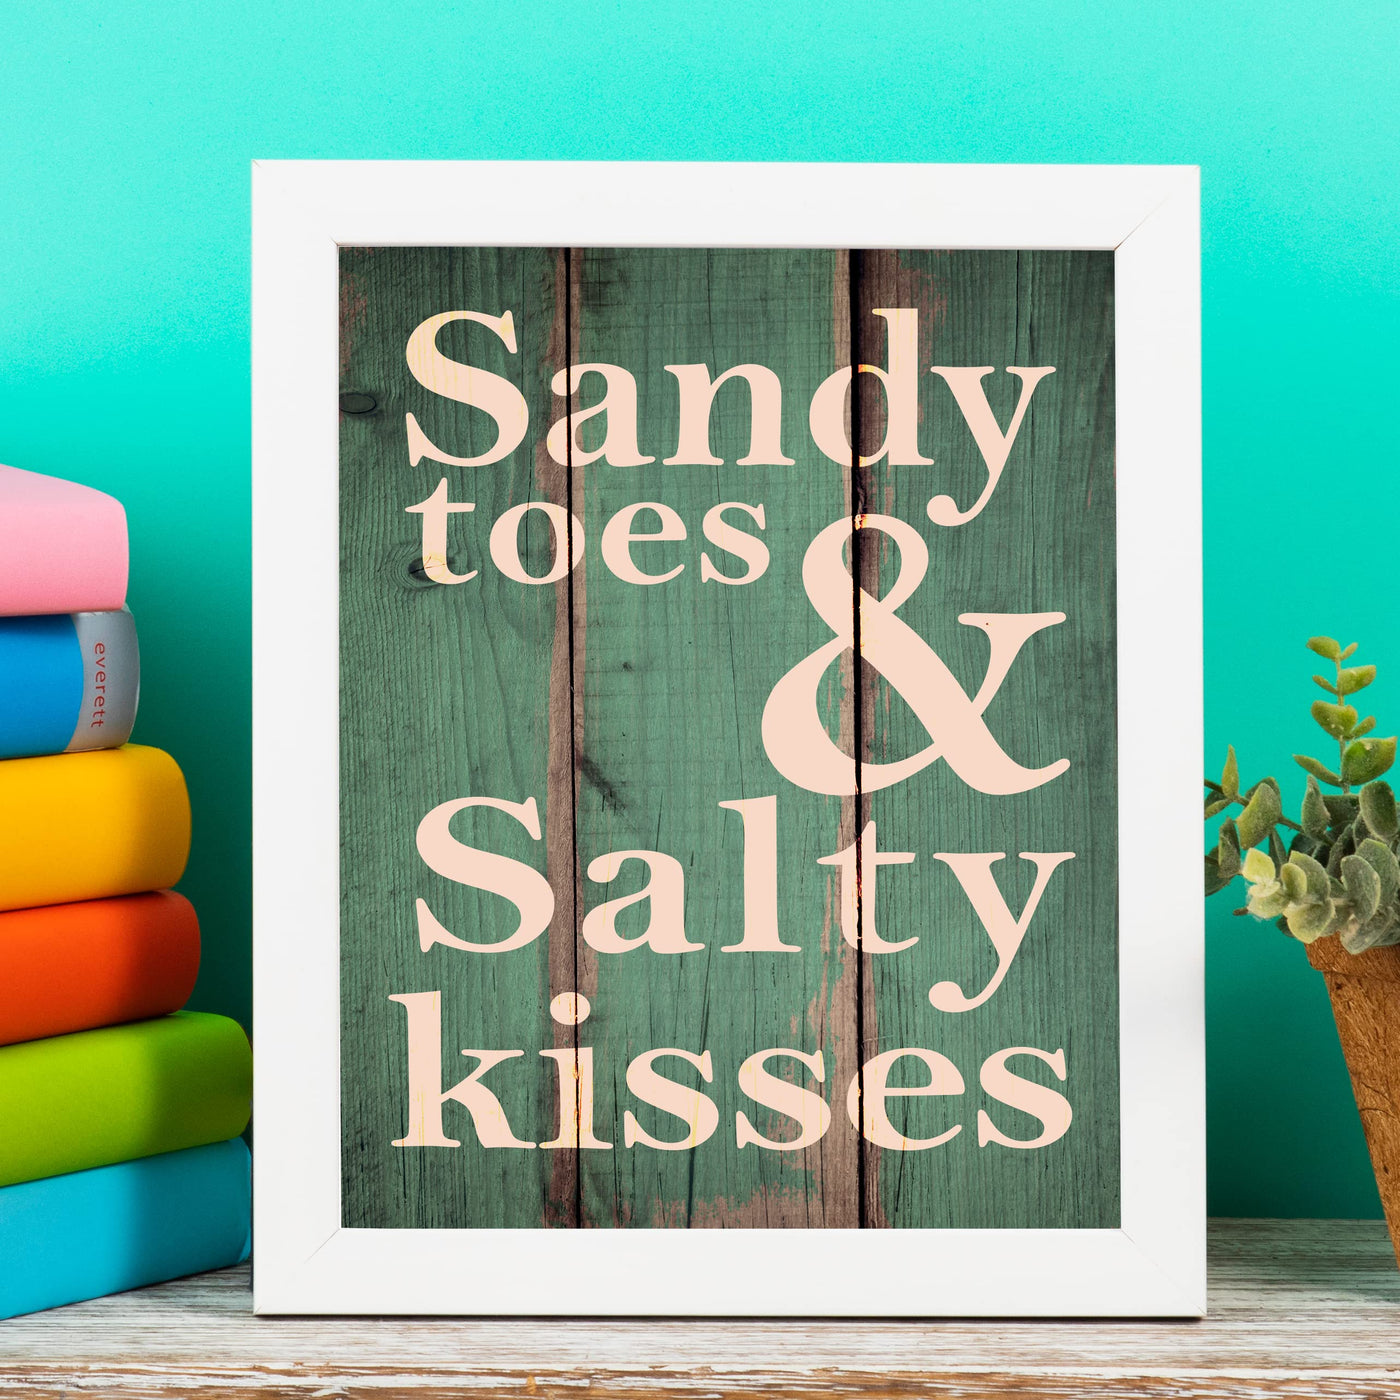 Sandy Toes & Salty Kisses Fun, Rustic Beach House Sign -8 x 10" Ocean Themed Wall Print w/Replica Wood Design -Ready to Frame. Perfect Home-Cabin-Nautical-Coastal Decor. Printed on Photo Paper.